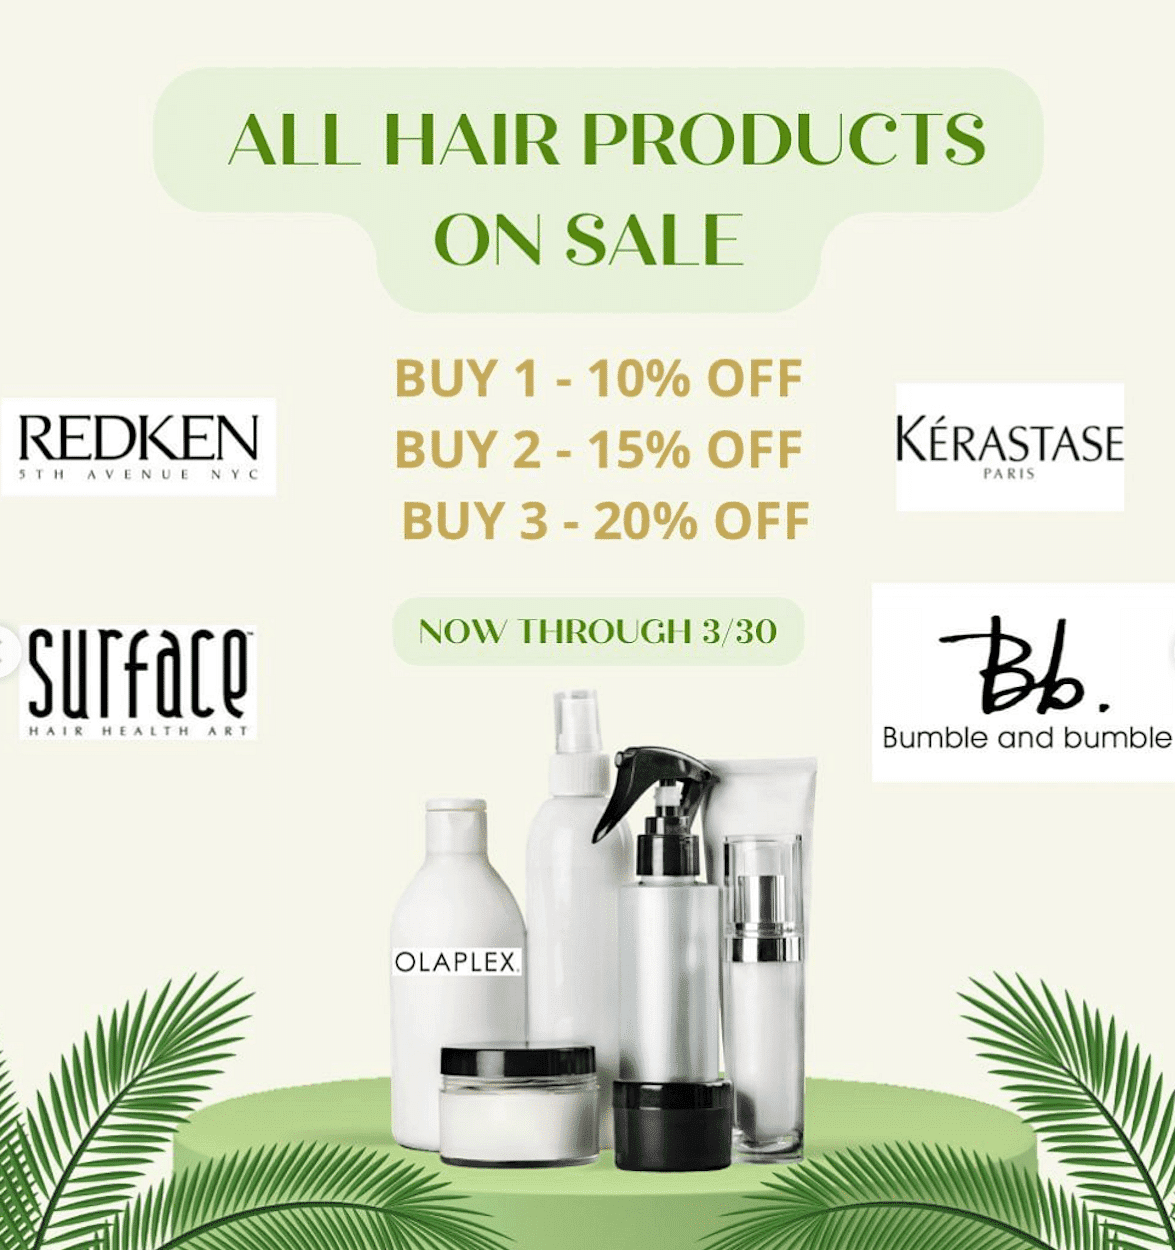 Sale on hair products with tiered discounts, surrounded by palm leaves.